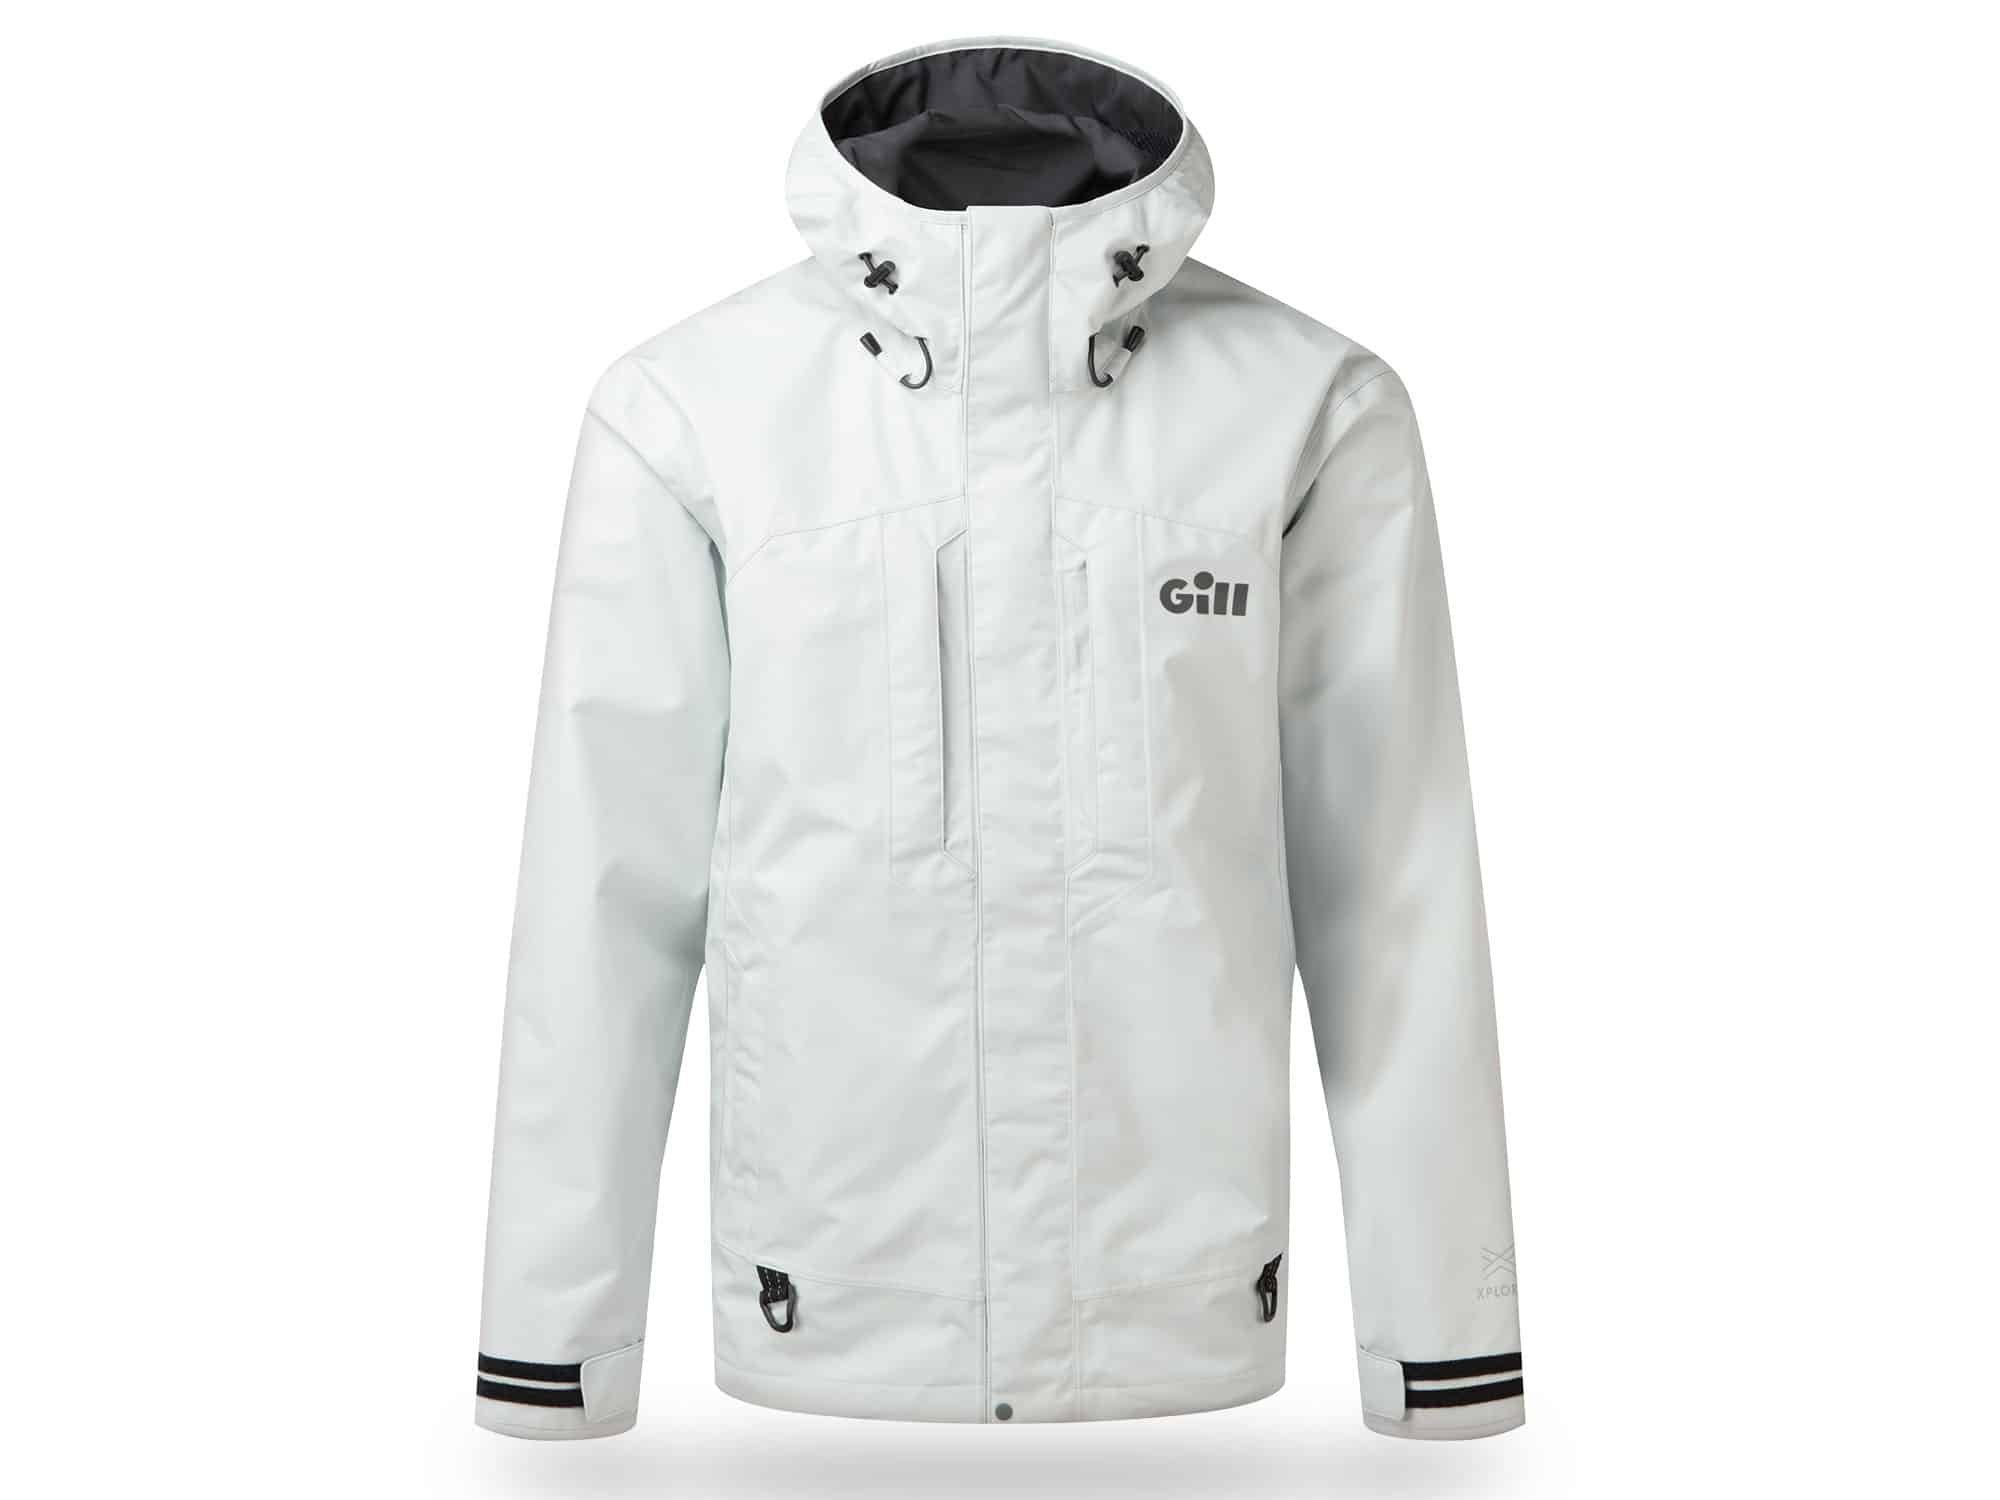 Boating Jackets for Foul Weather | Boating Mag